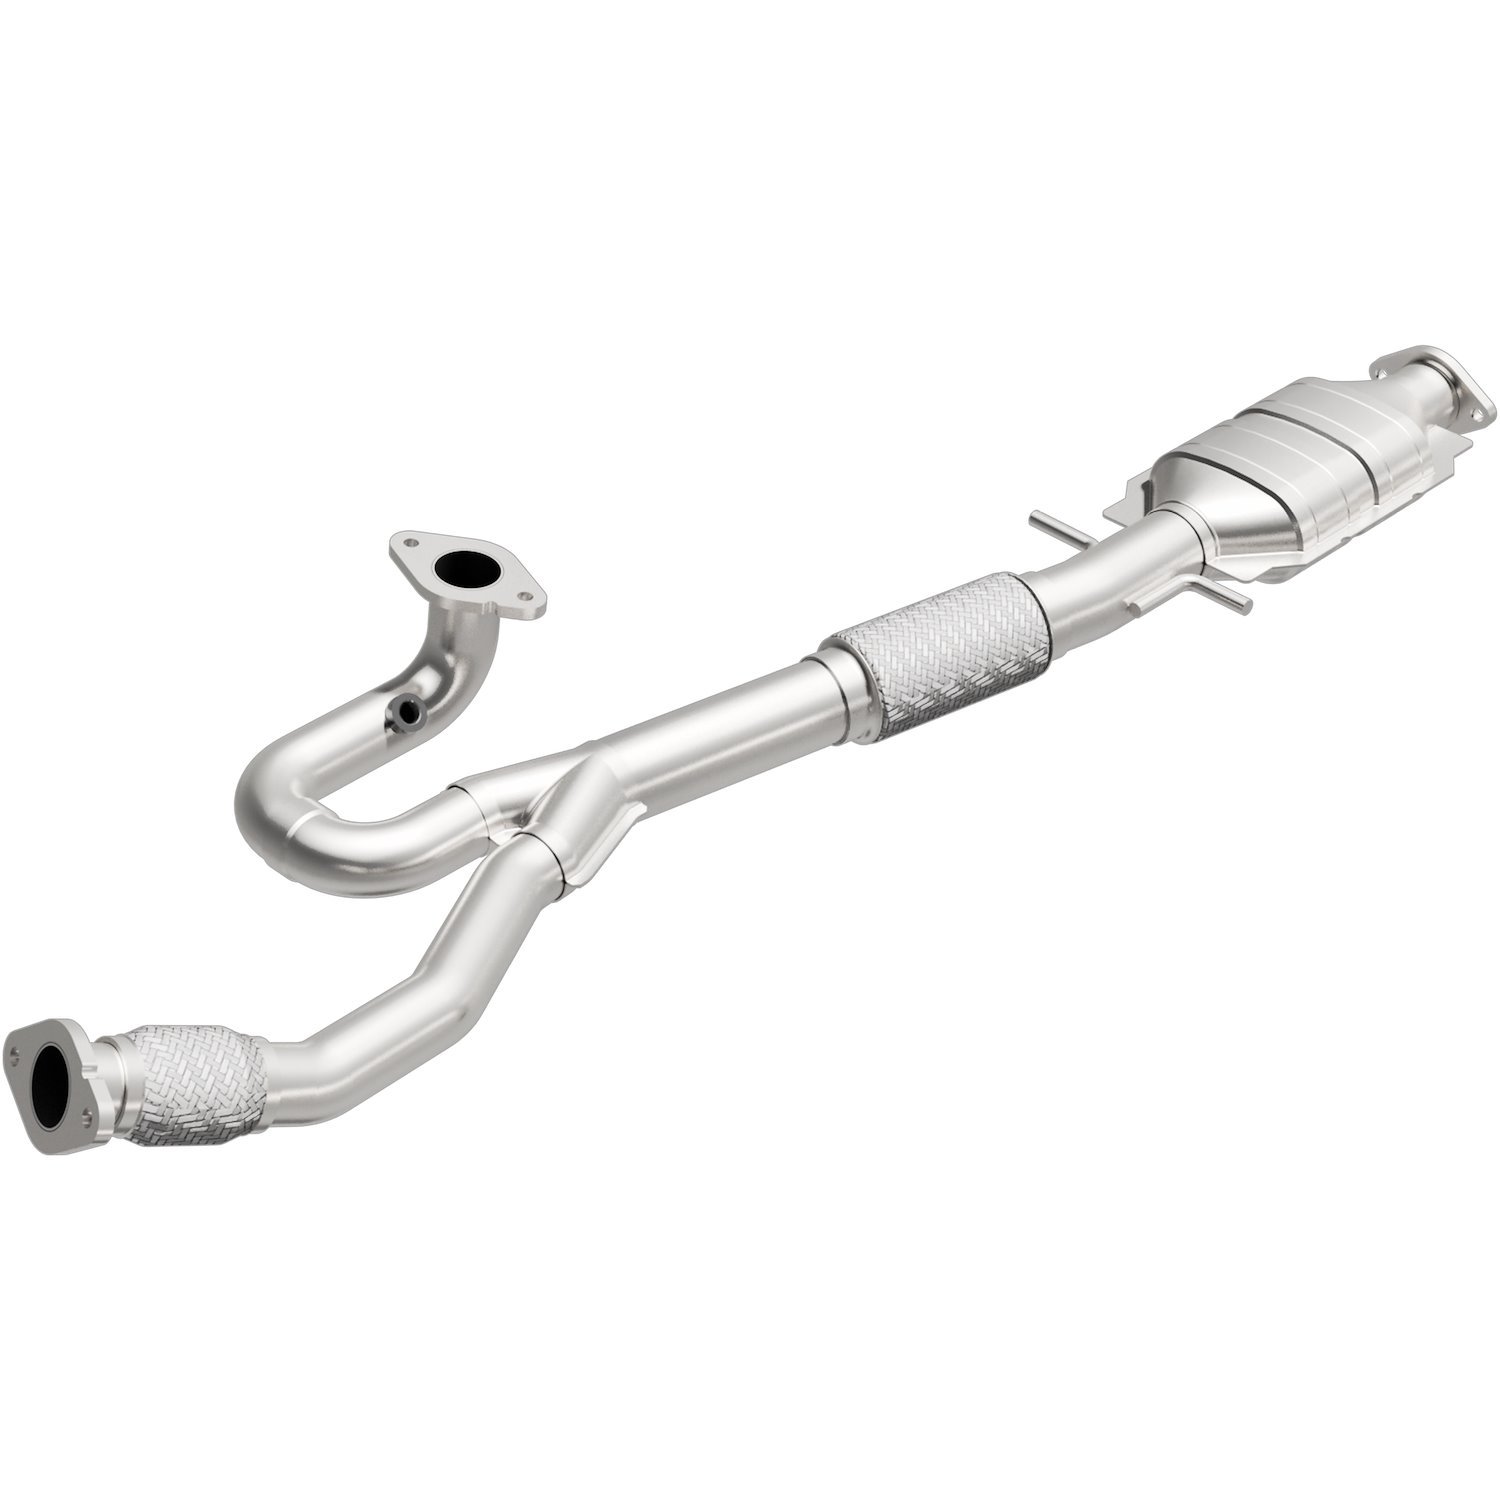 2010-2012 Buick LaCrosse OEM Grade Federal / EPA Compliant Direct-Fit Catalytic Converter